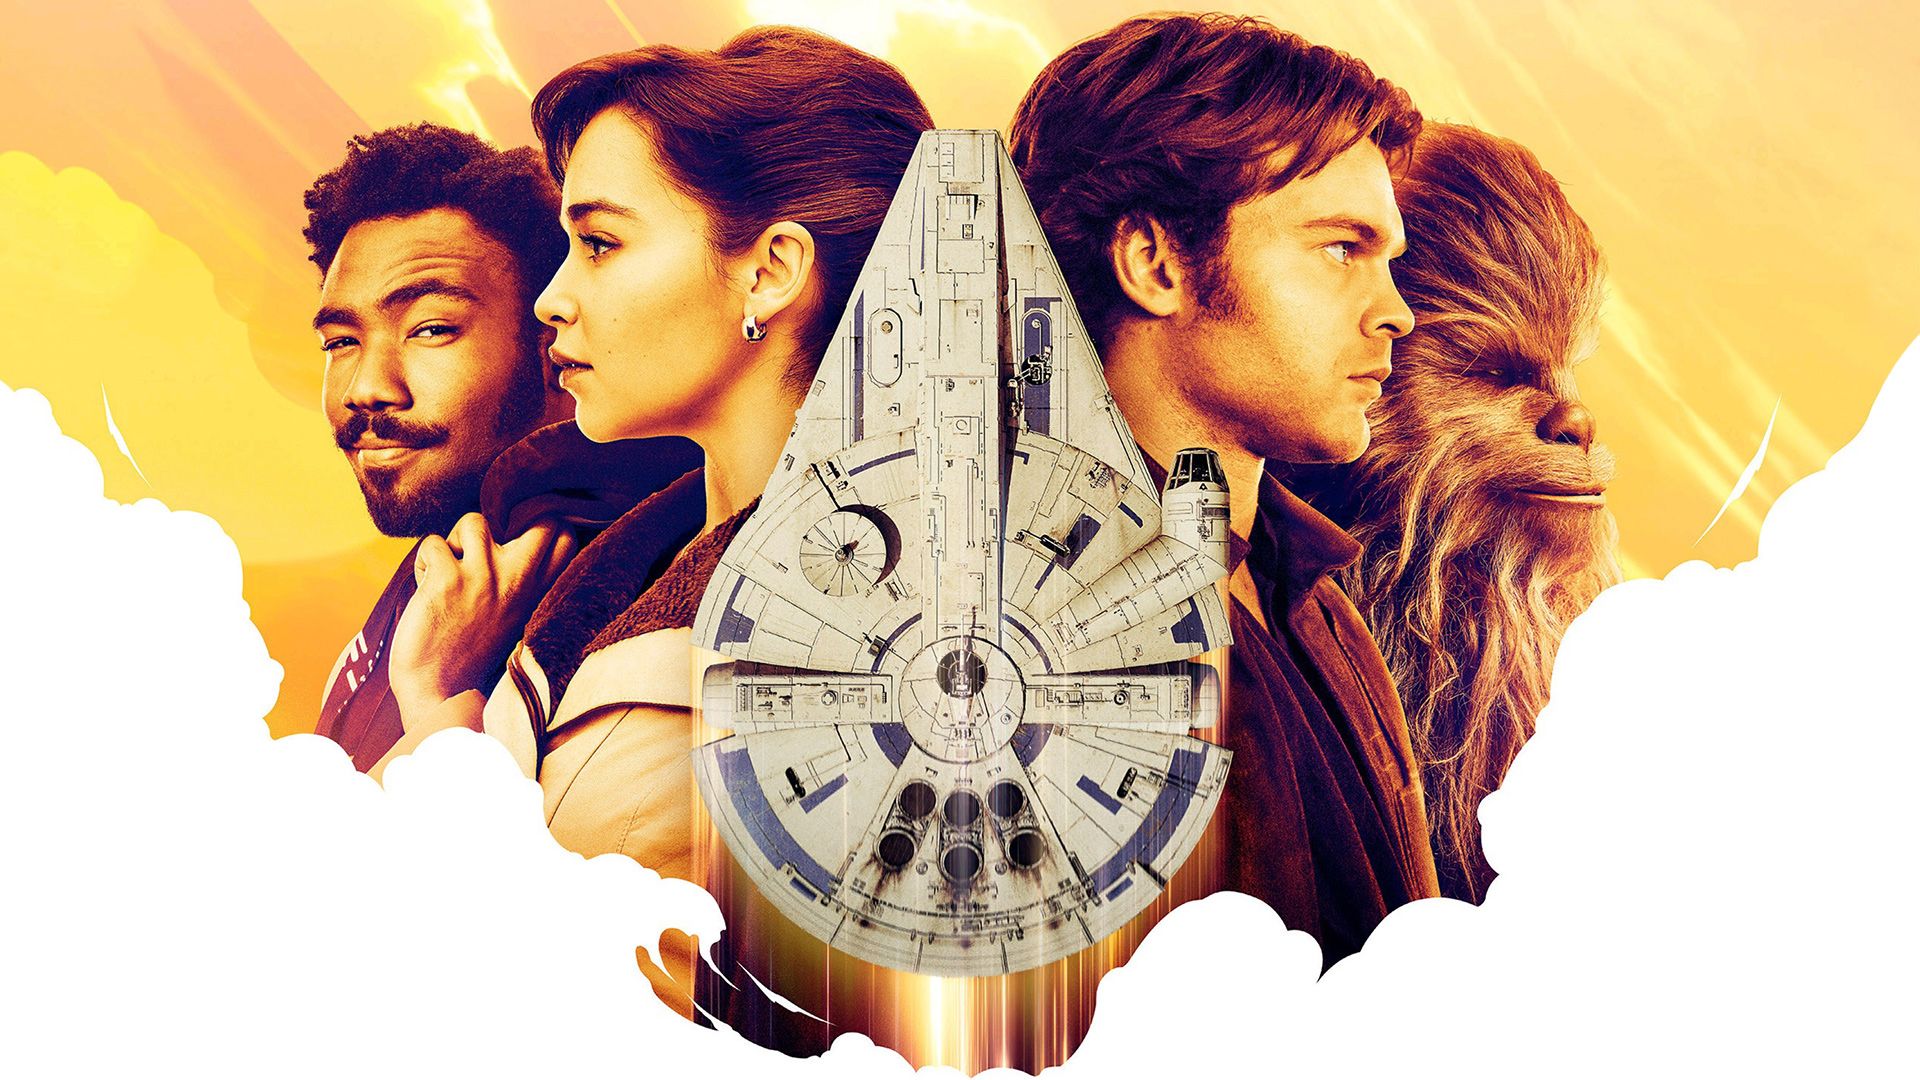 Solo: A Star Wars Story background